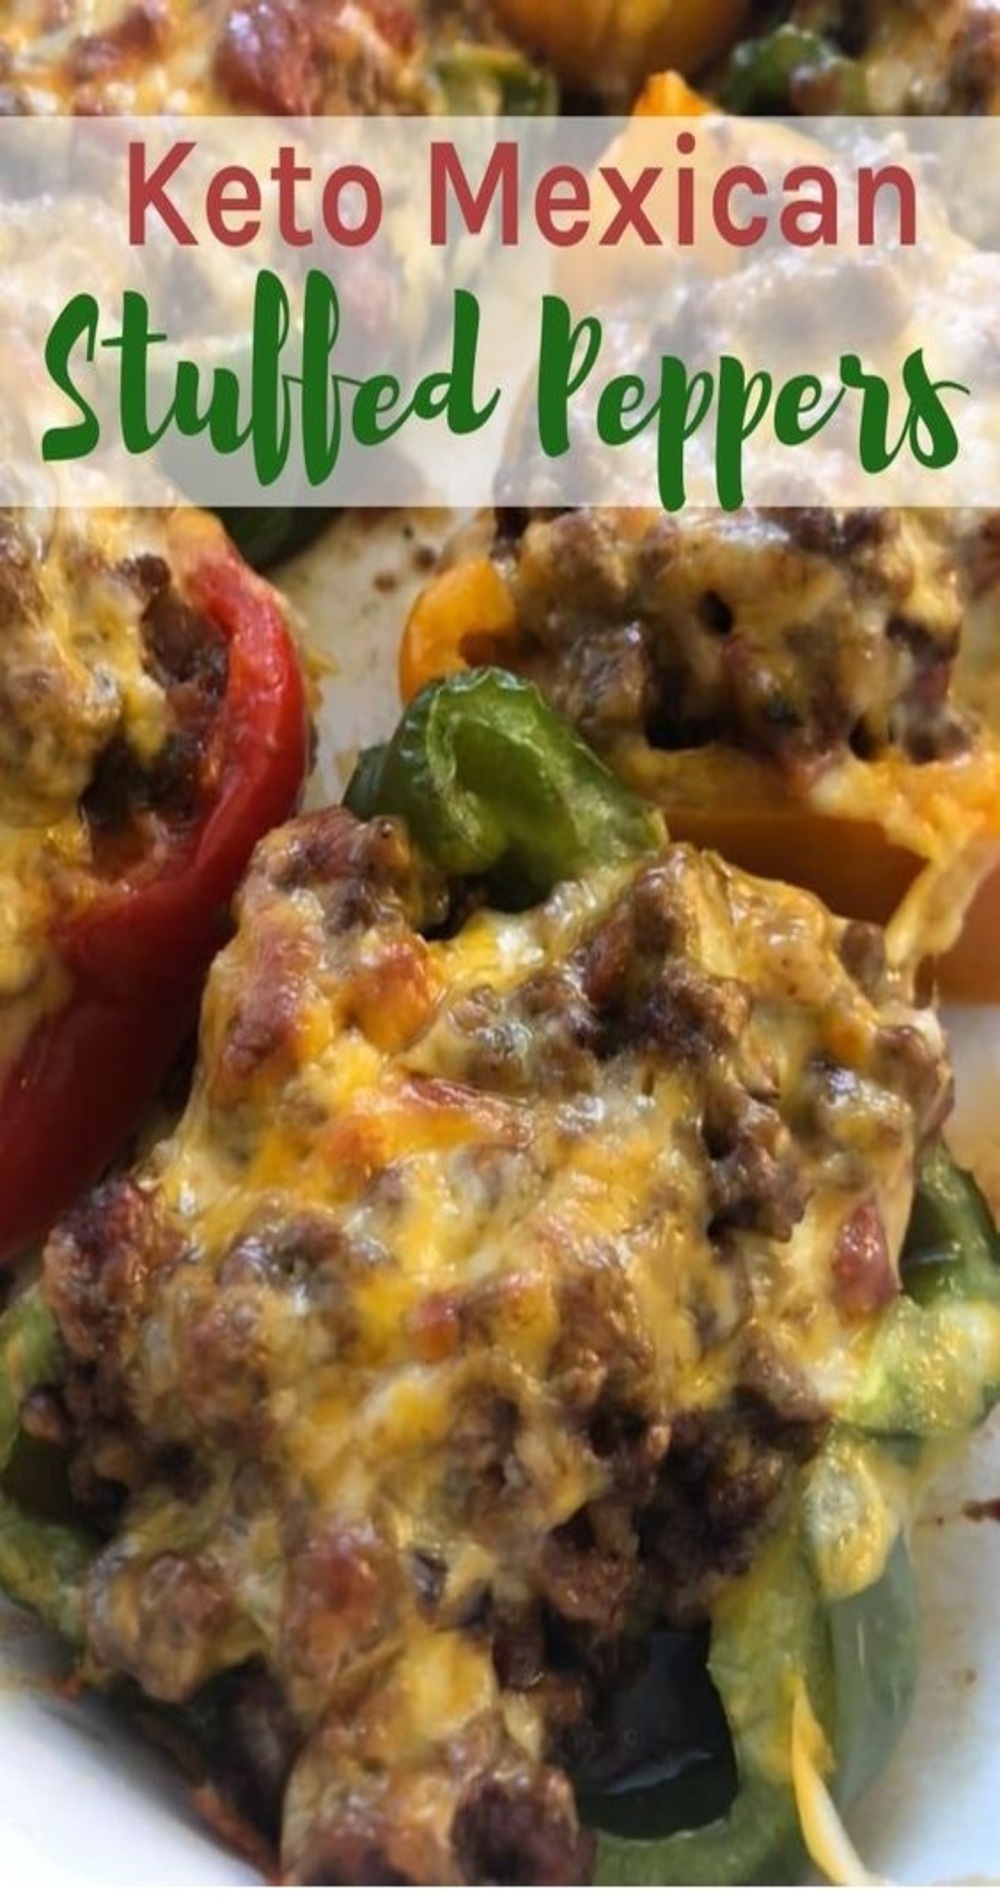 Keto Mexican Stuffed Peppers